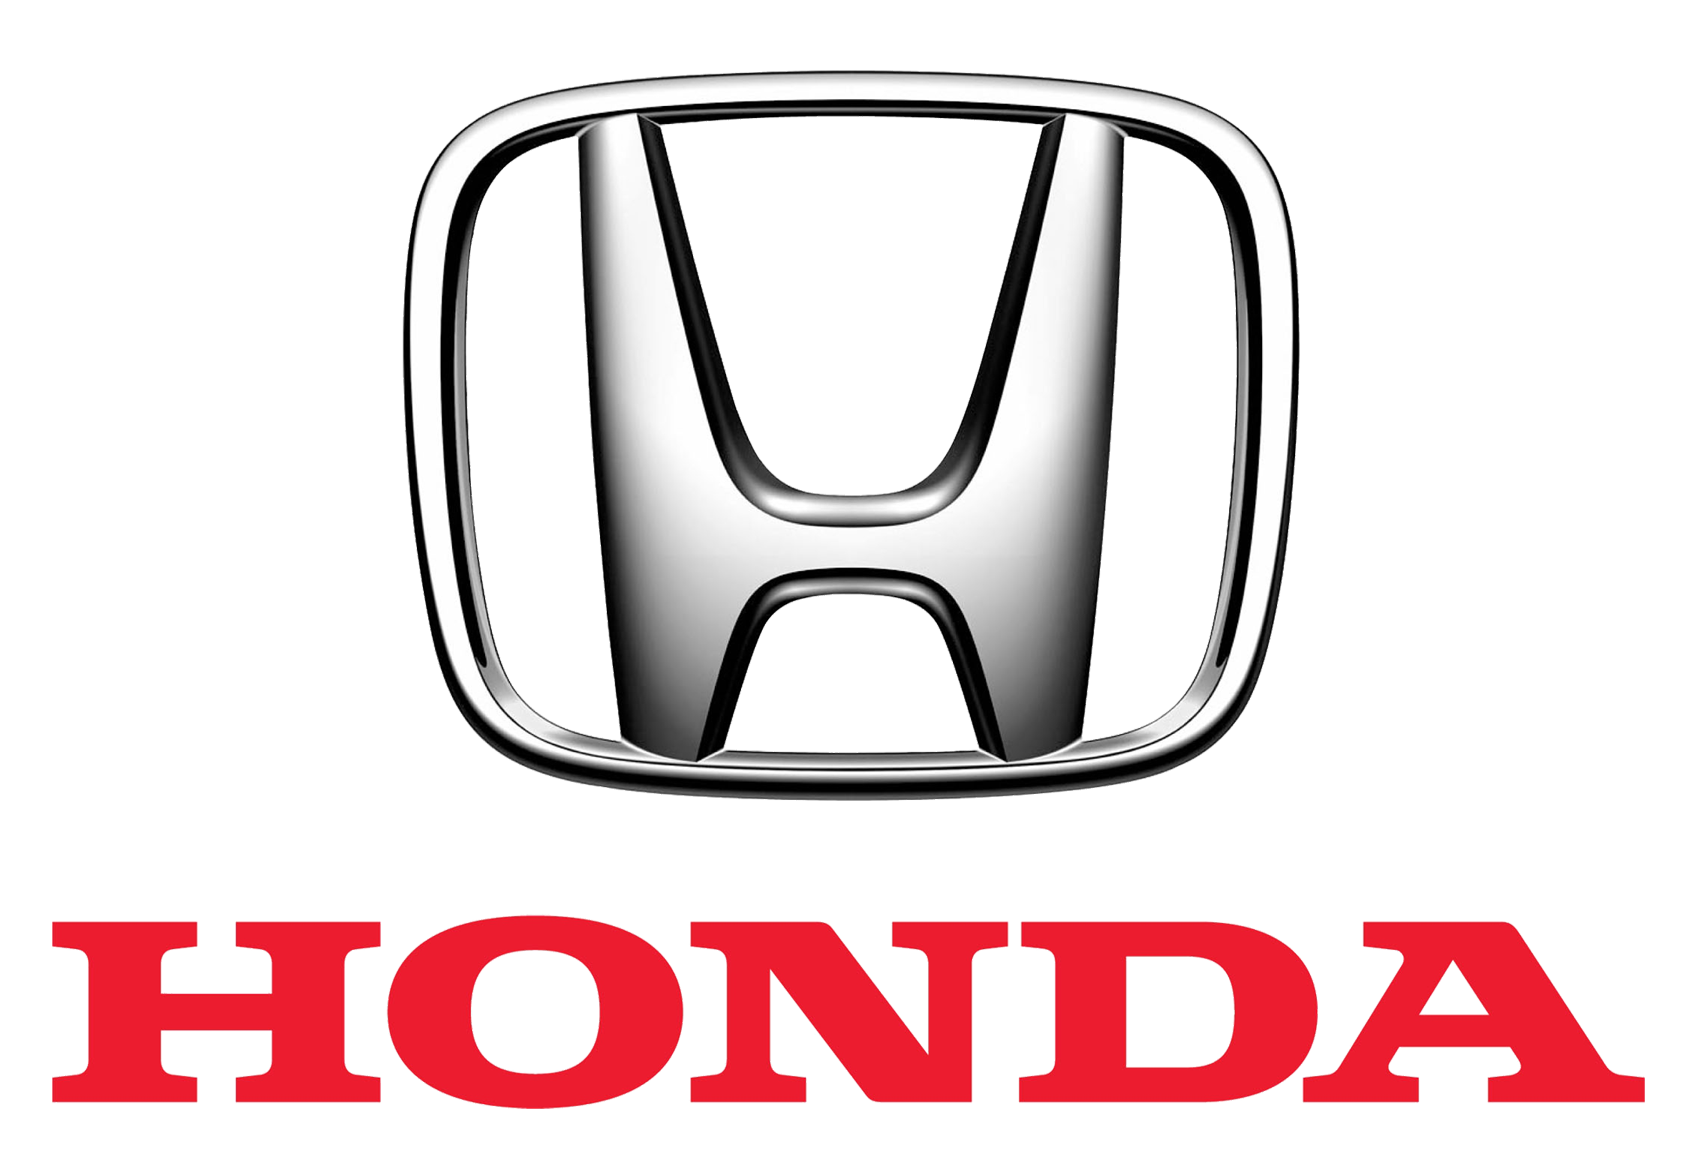 https://static.wikia.nocookie.net/gran-turismo/images/7/7d/Honda_Logo.png/revision/latest?cb=20220819134156